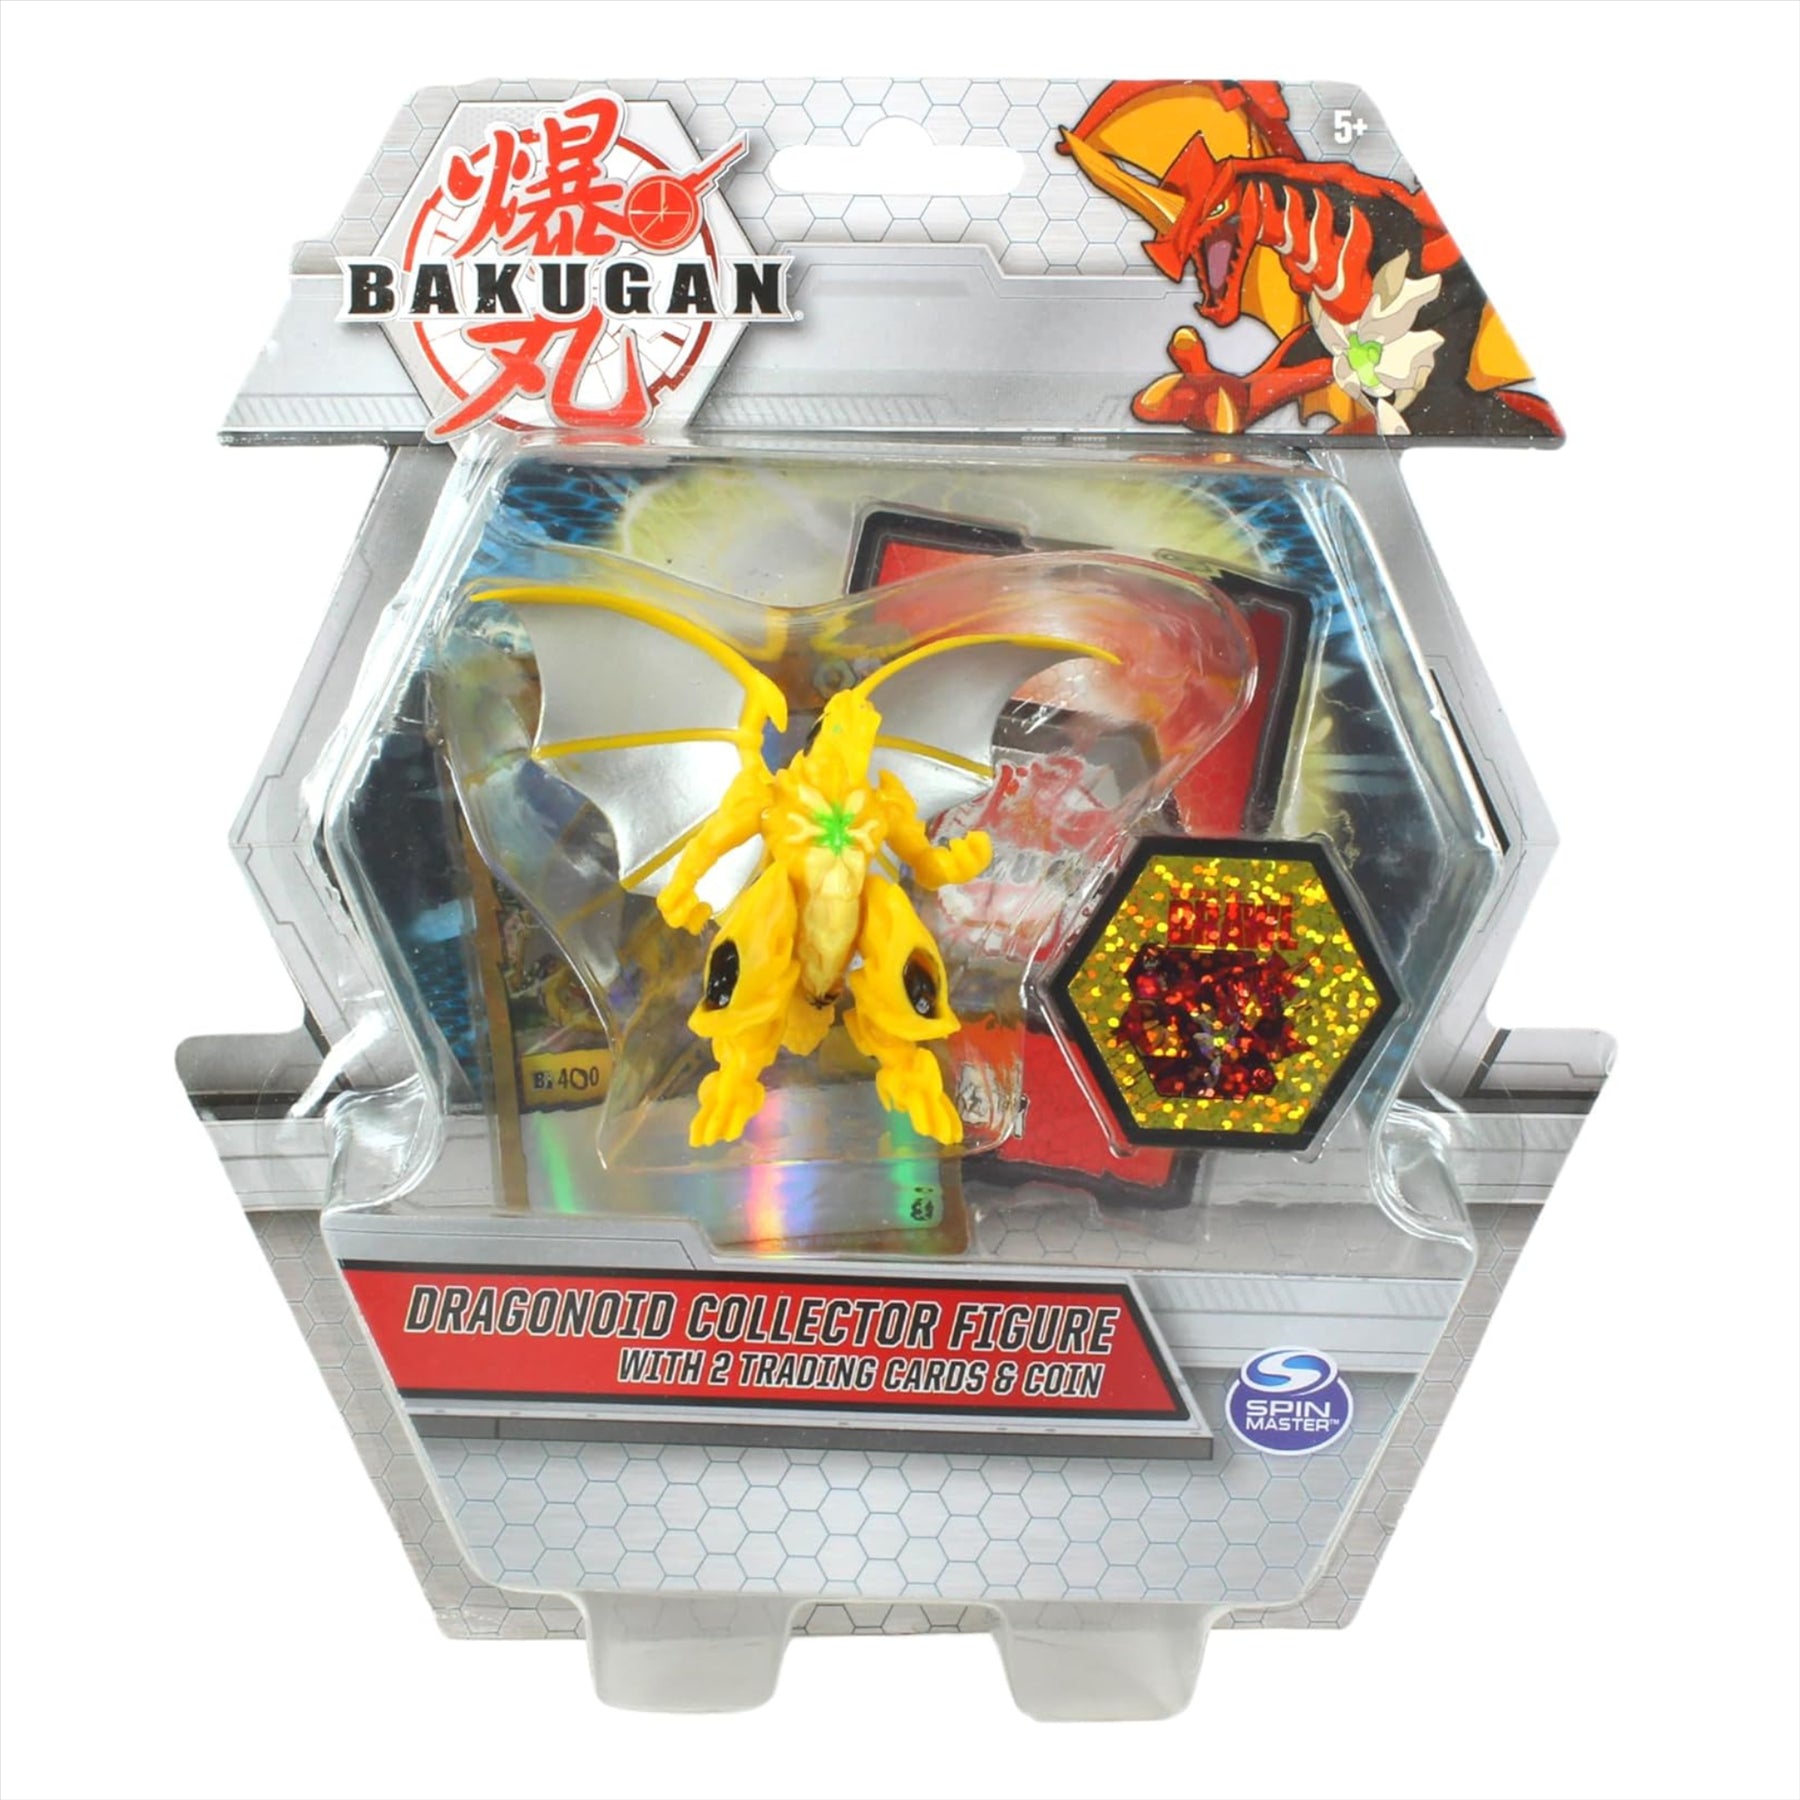 Bakugan - Deluxe Collector Figure Bundle With 2x Cards & Coin In Each Pack - 4 Pack - Set 2 - Toptoys2u